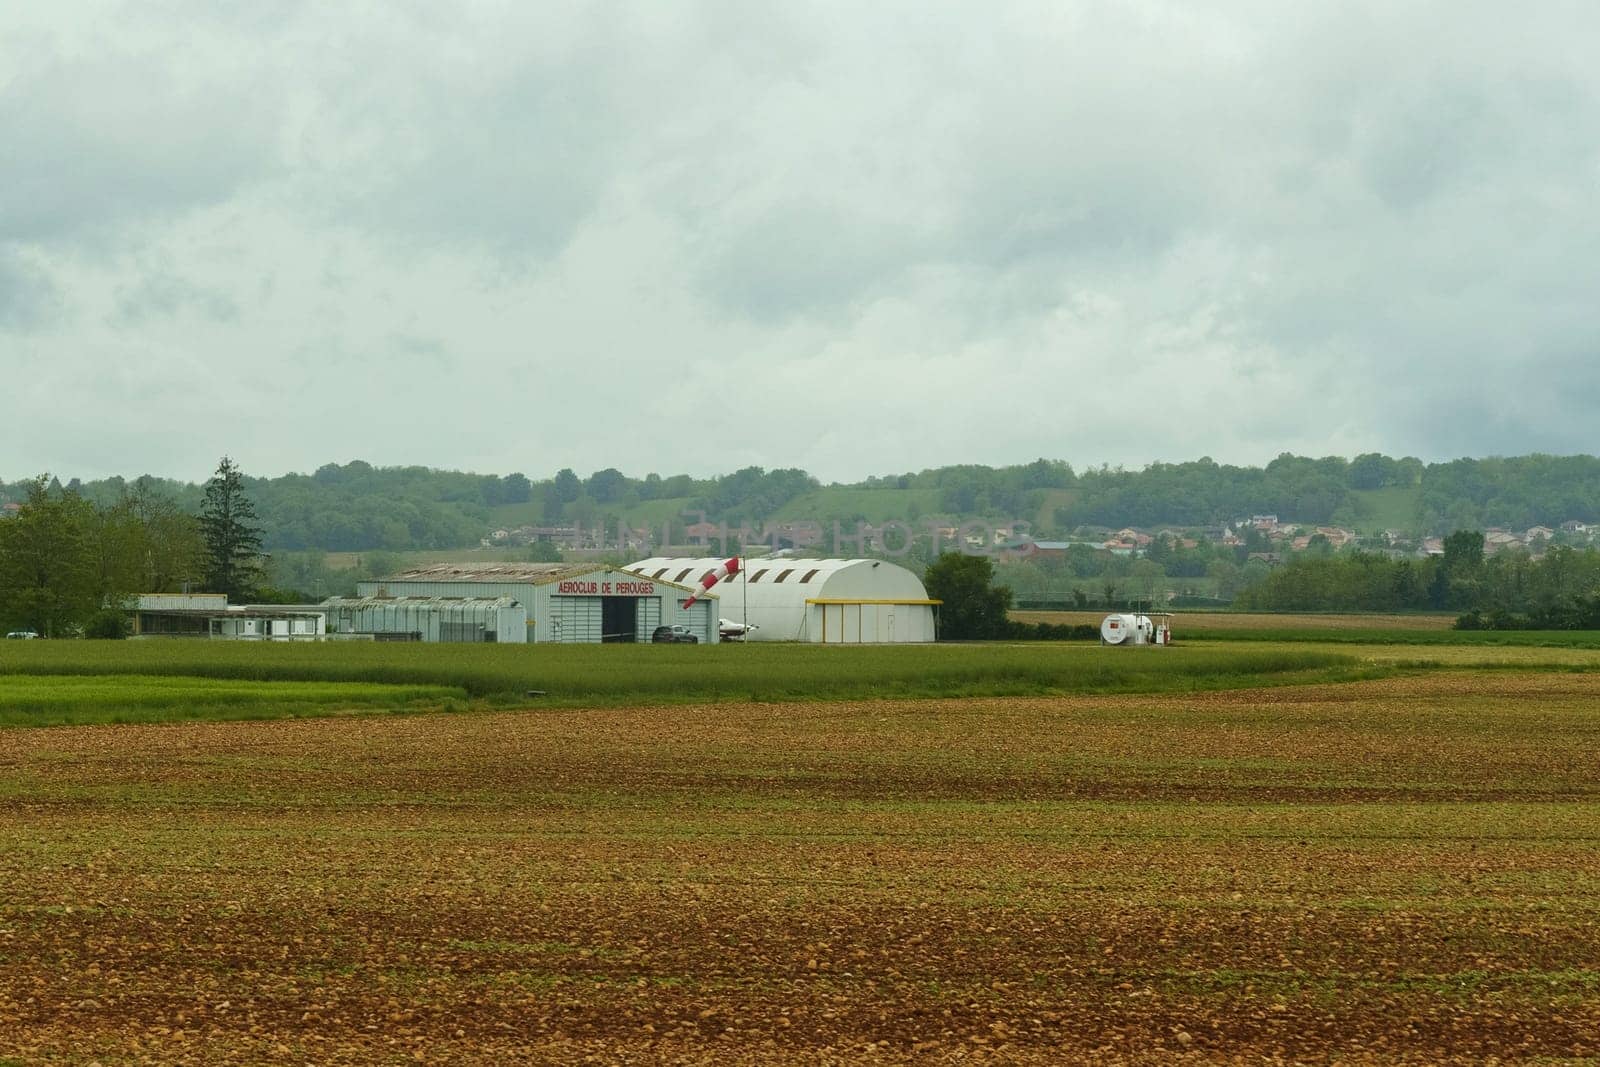 Lyon, France - May 7, 2023: Aeroclub de Perouges hangars in a rural French landscape, surrounded by fields and greenery, under a cloudy spring sky.